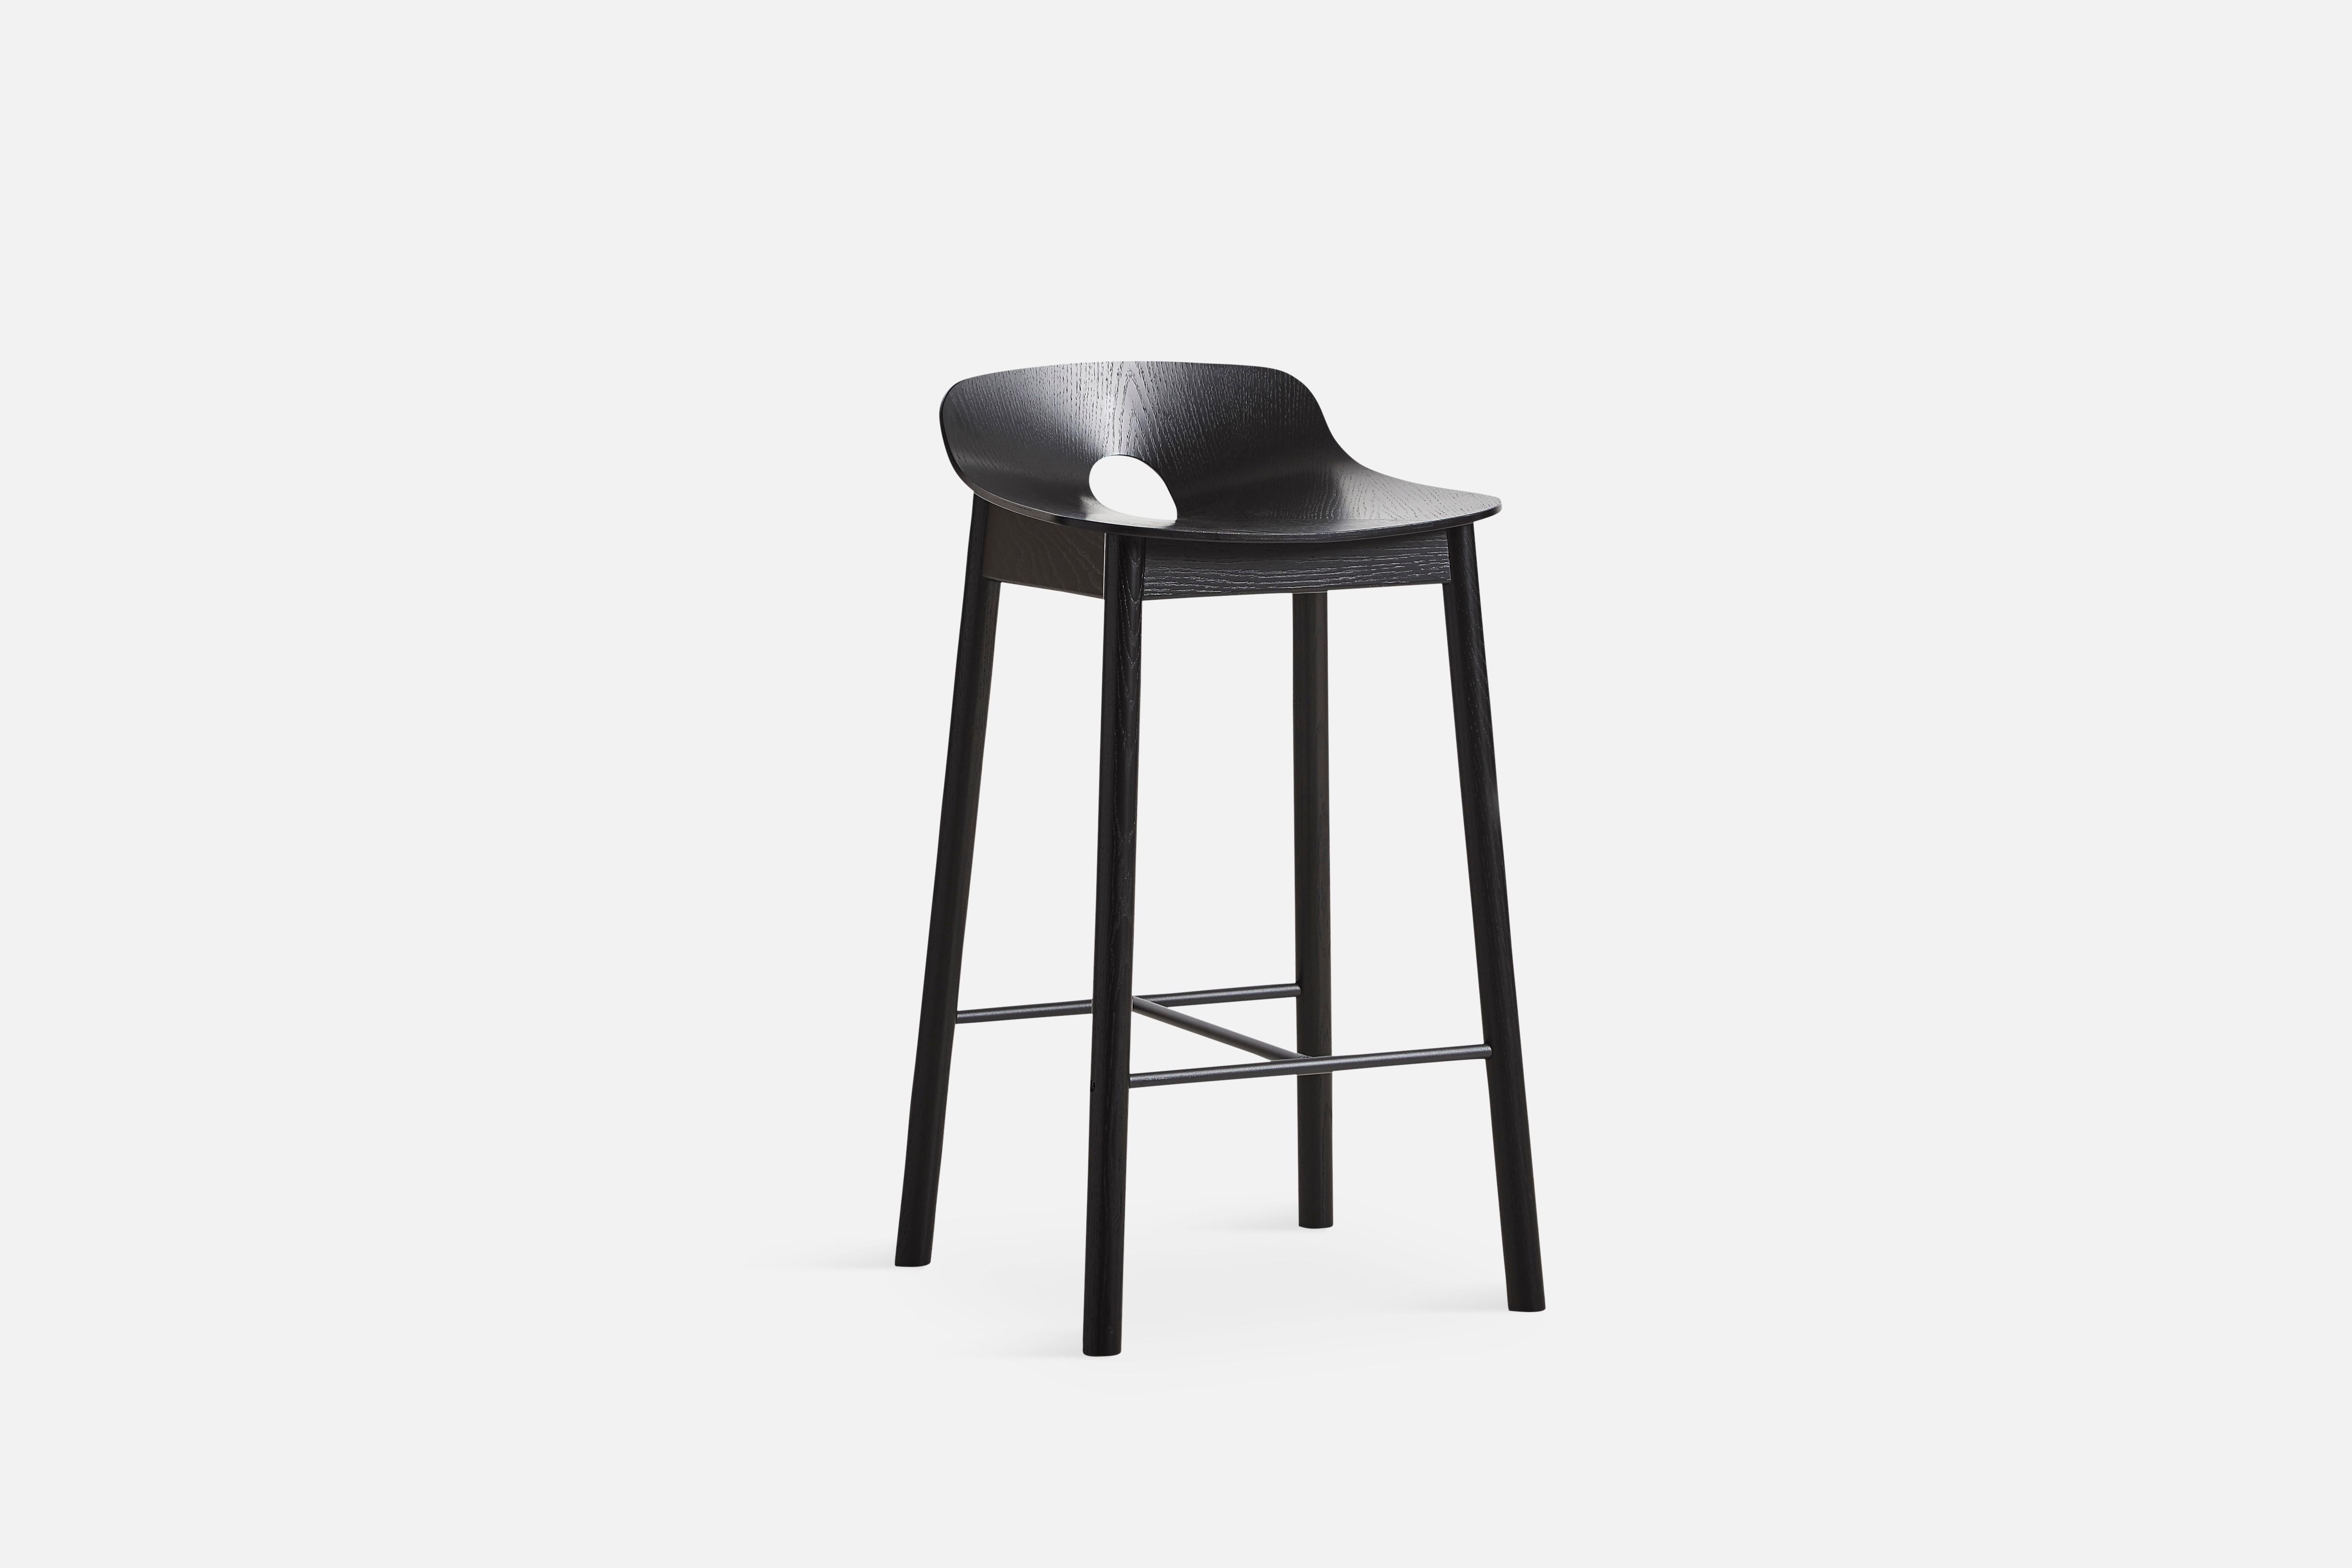 Black Ash Mono counter chair by Kasper Nyman
Materials: Plywood with oak veneer
Dimensions: D 42.8 x W 42.2 x H 77.6 cm

The founders, Mia and Torben Koed, decided to put their 30 years of experience into a new project. It was time for a change